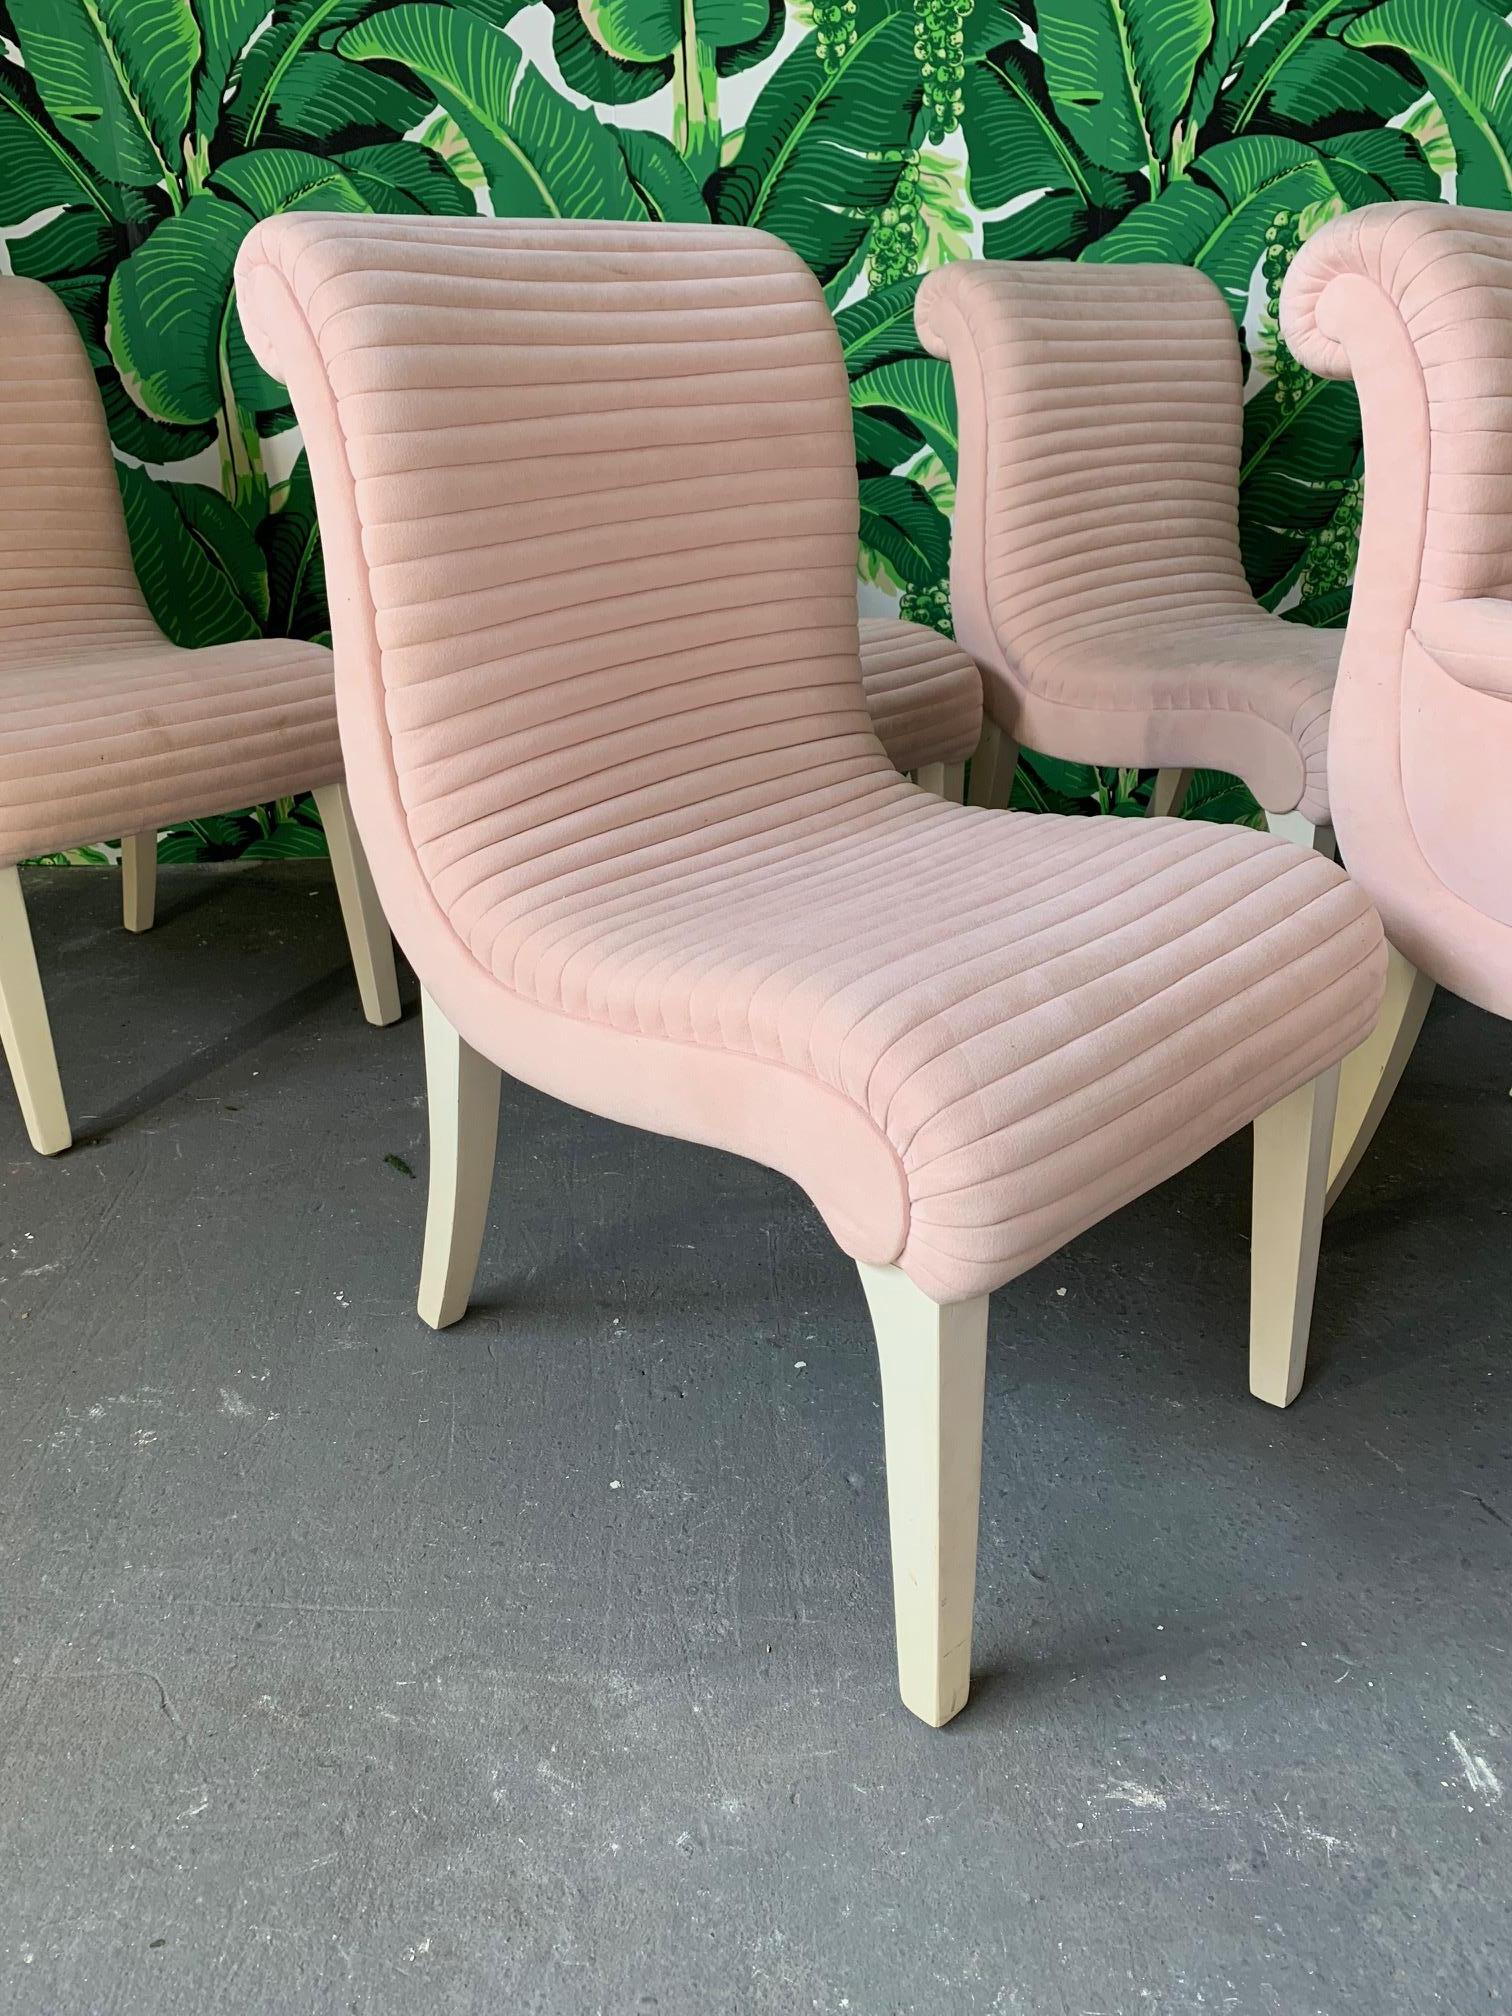 Set of 6 sculptural dining chairs by Preview Furniture Co. of Hickory, NC. Upholstered in a light pink fabric similar to suede. Velvety soft to the touch. Unique horizontal tufting and solid white legs. Chairs are heavy and structurally sound.